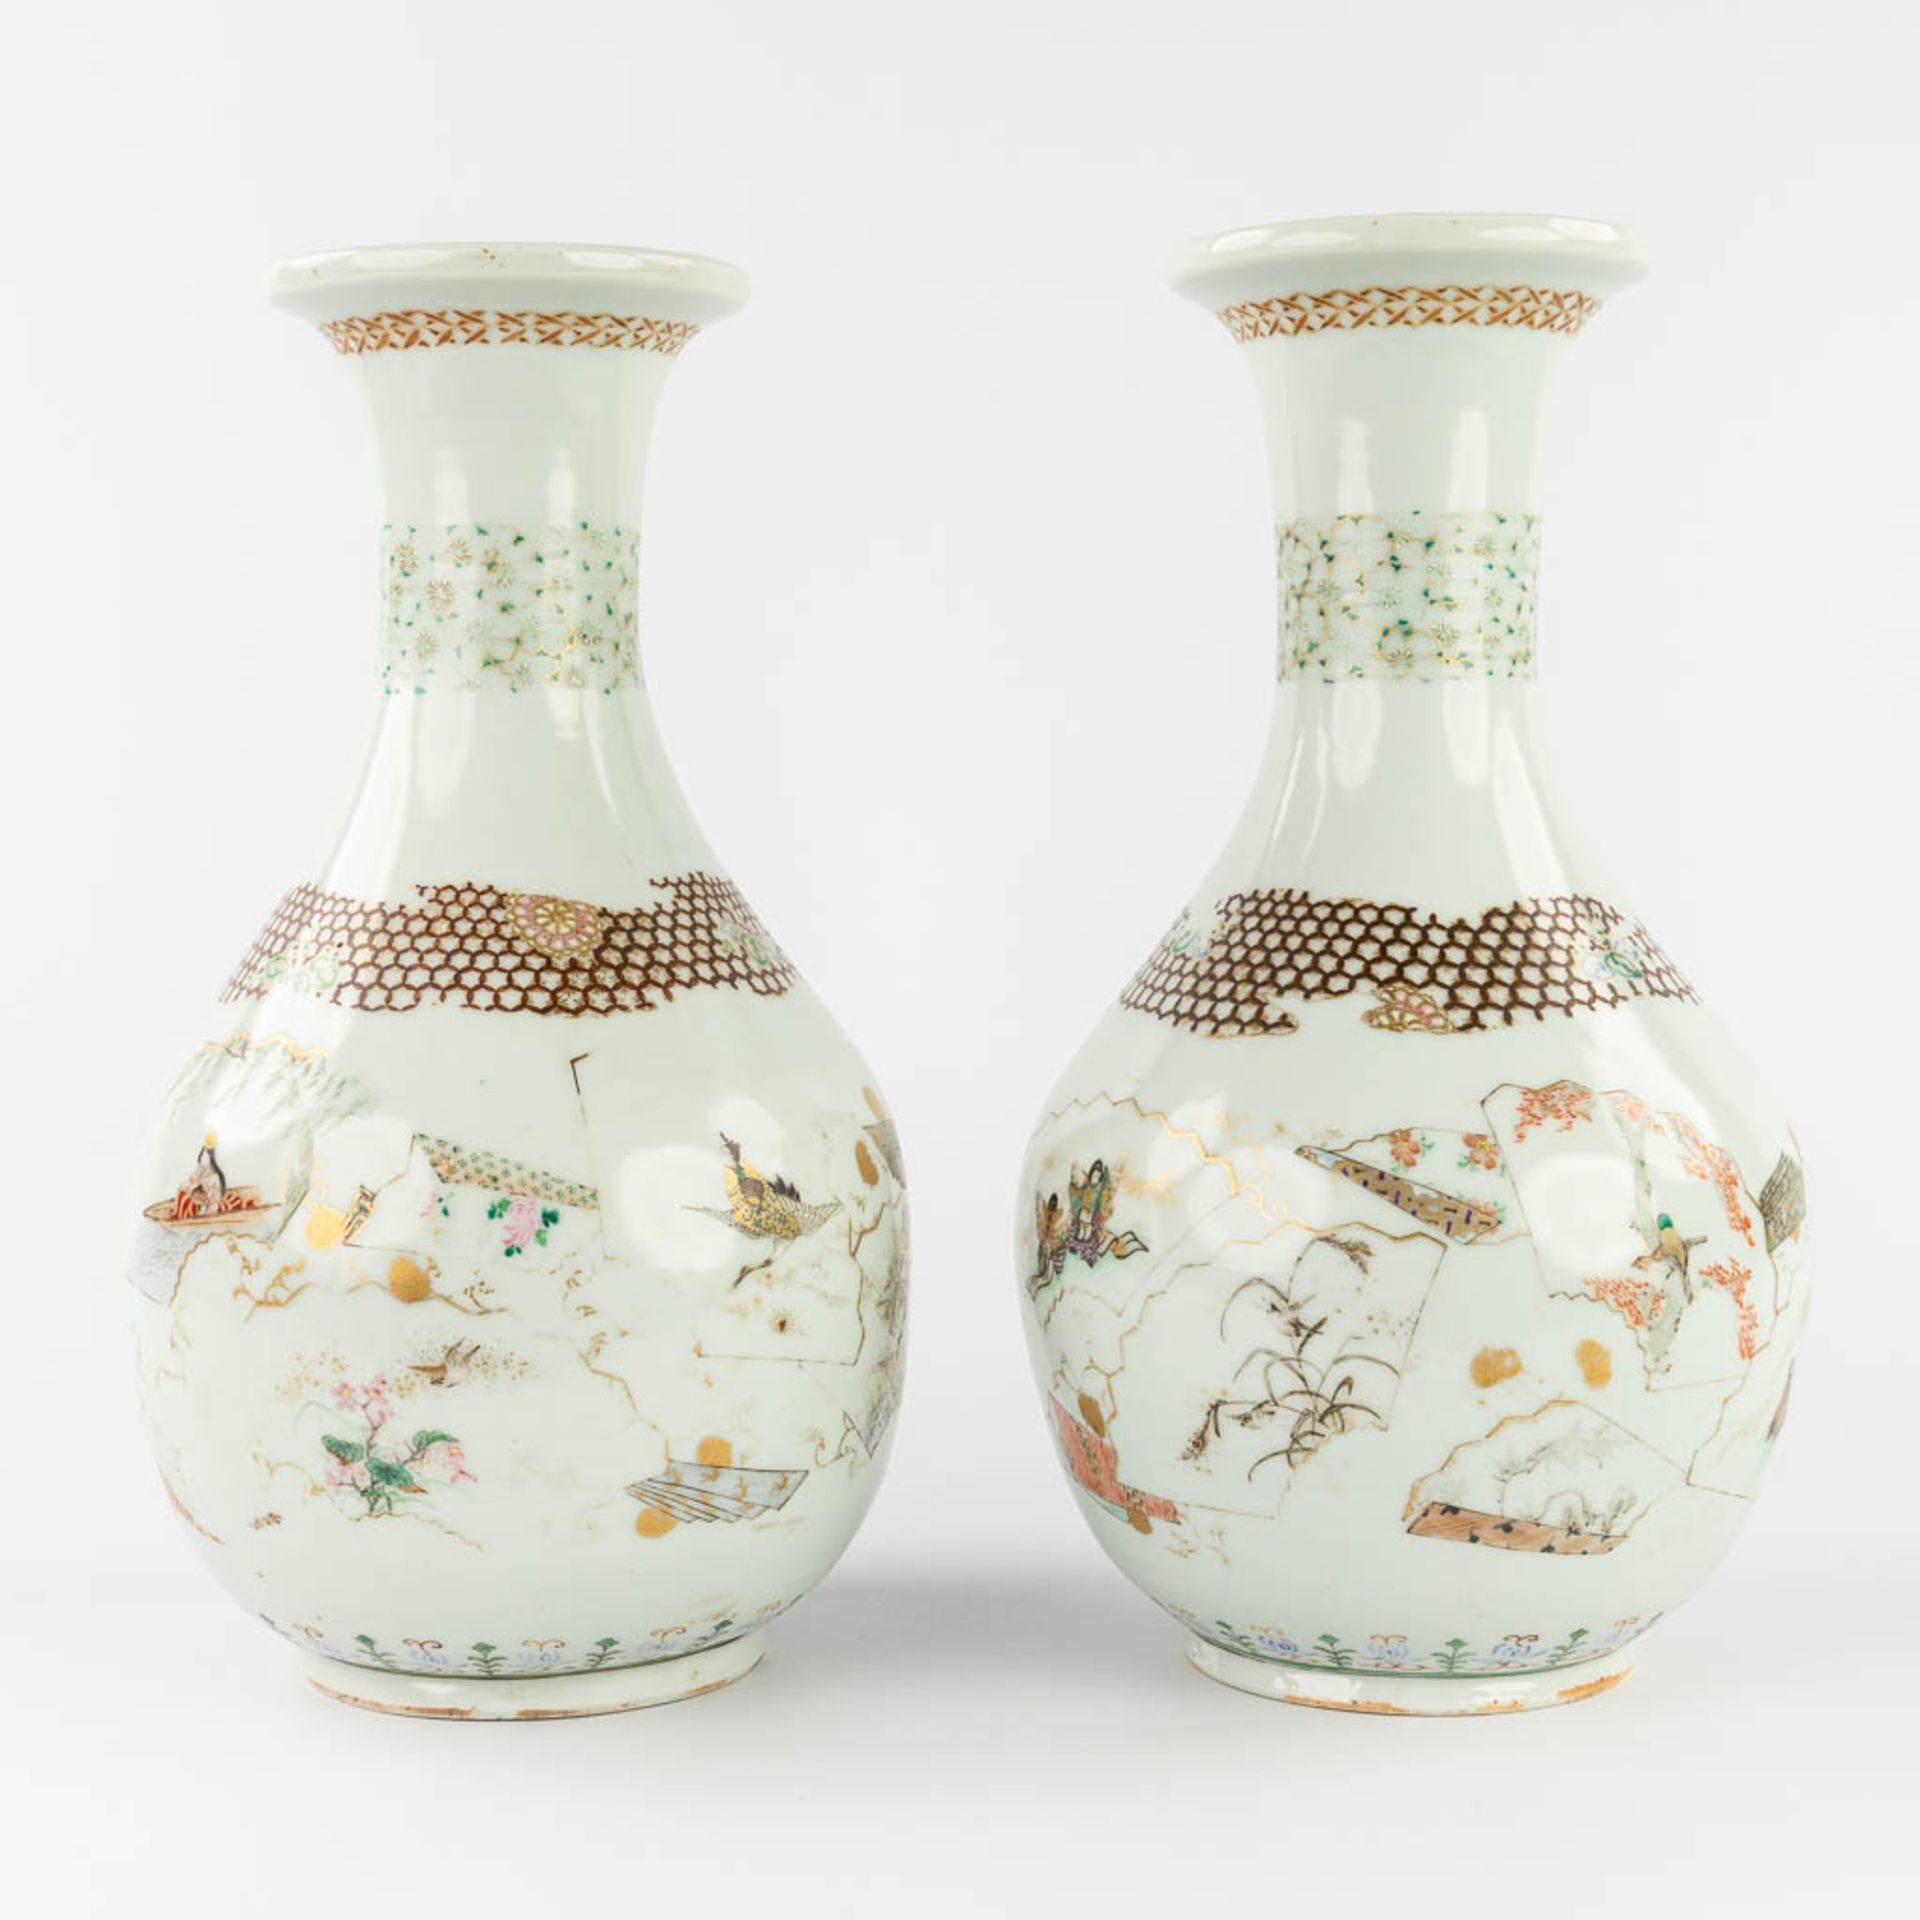 A pair of Japanese vases, decorated with hand-painted landscapes. 19th C. (H:37,5 x D:21 cm) - Image 7 of 15